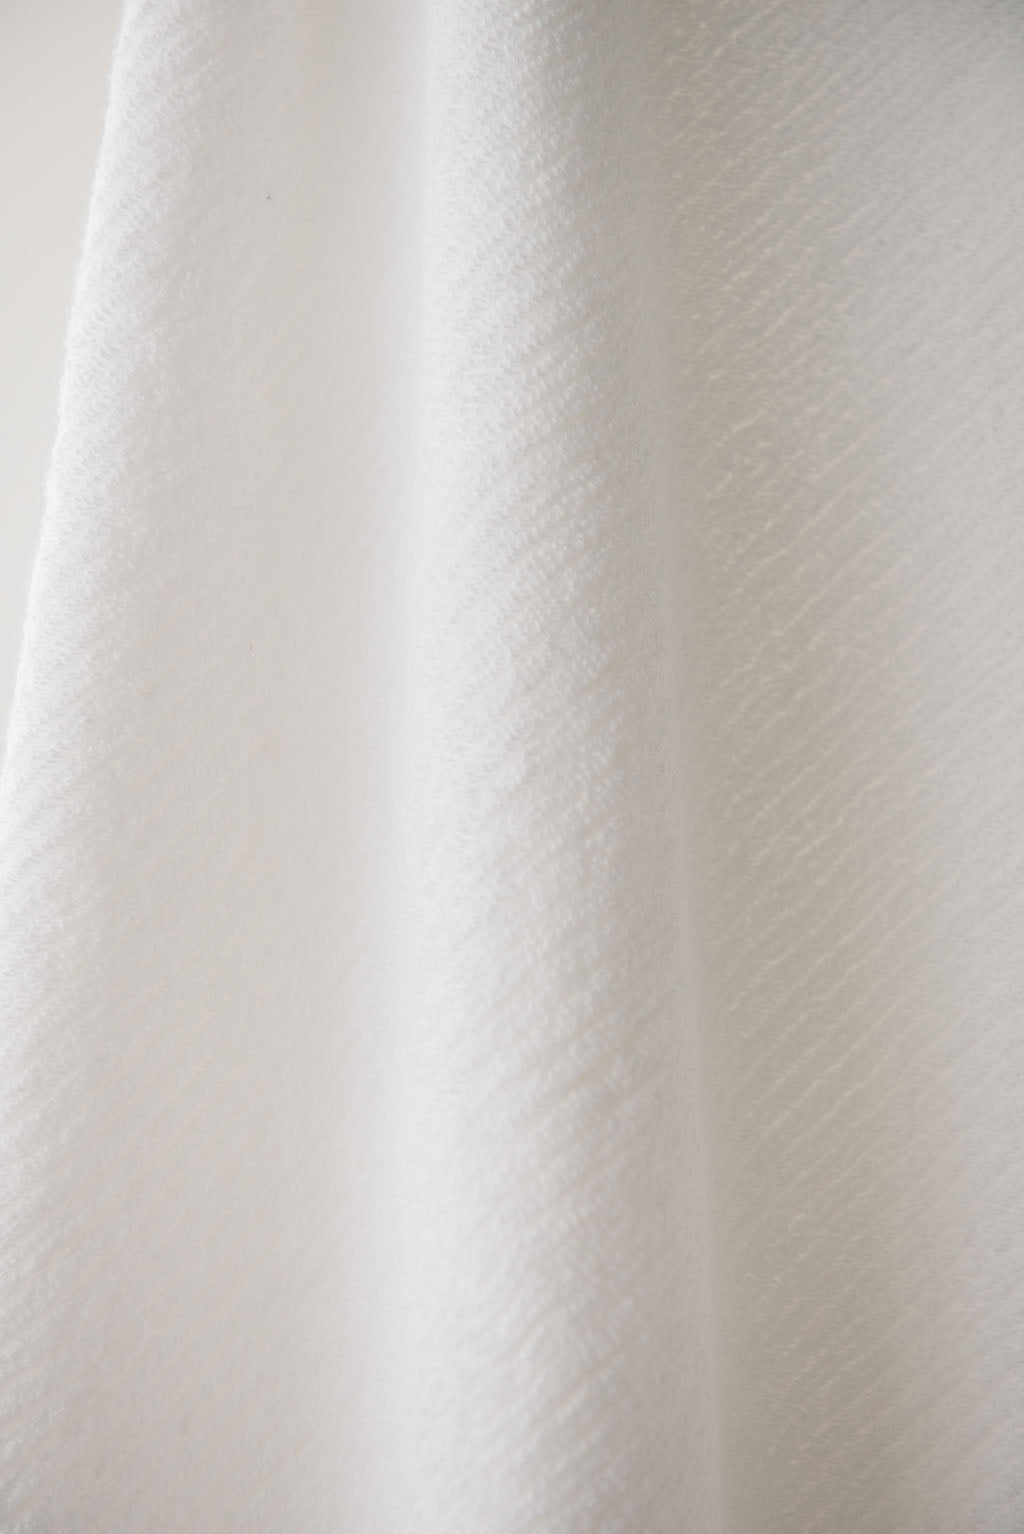 Ribbed Terry Bath Sheets in the color White. Photo of the towel is taken close up. 